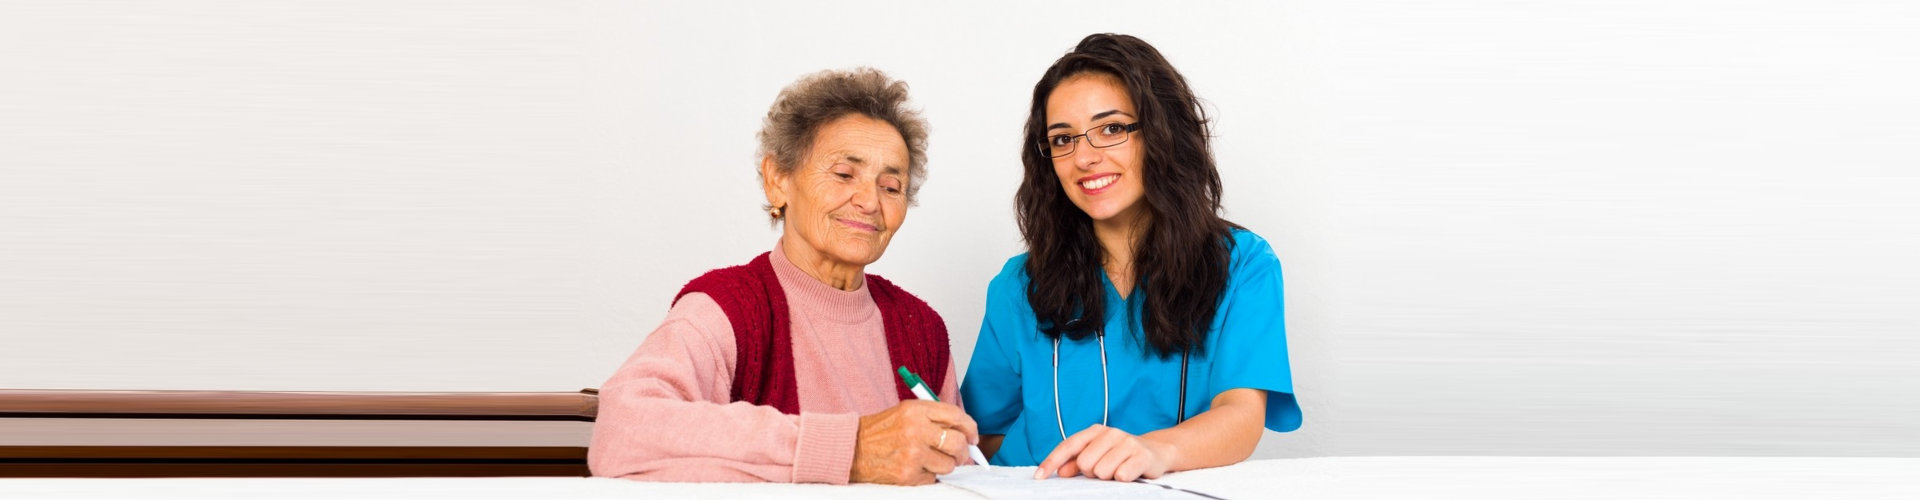 an elderly woman with a caregiver woman